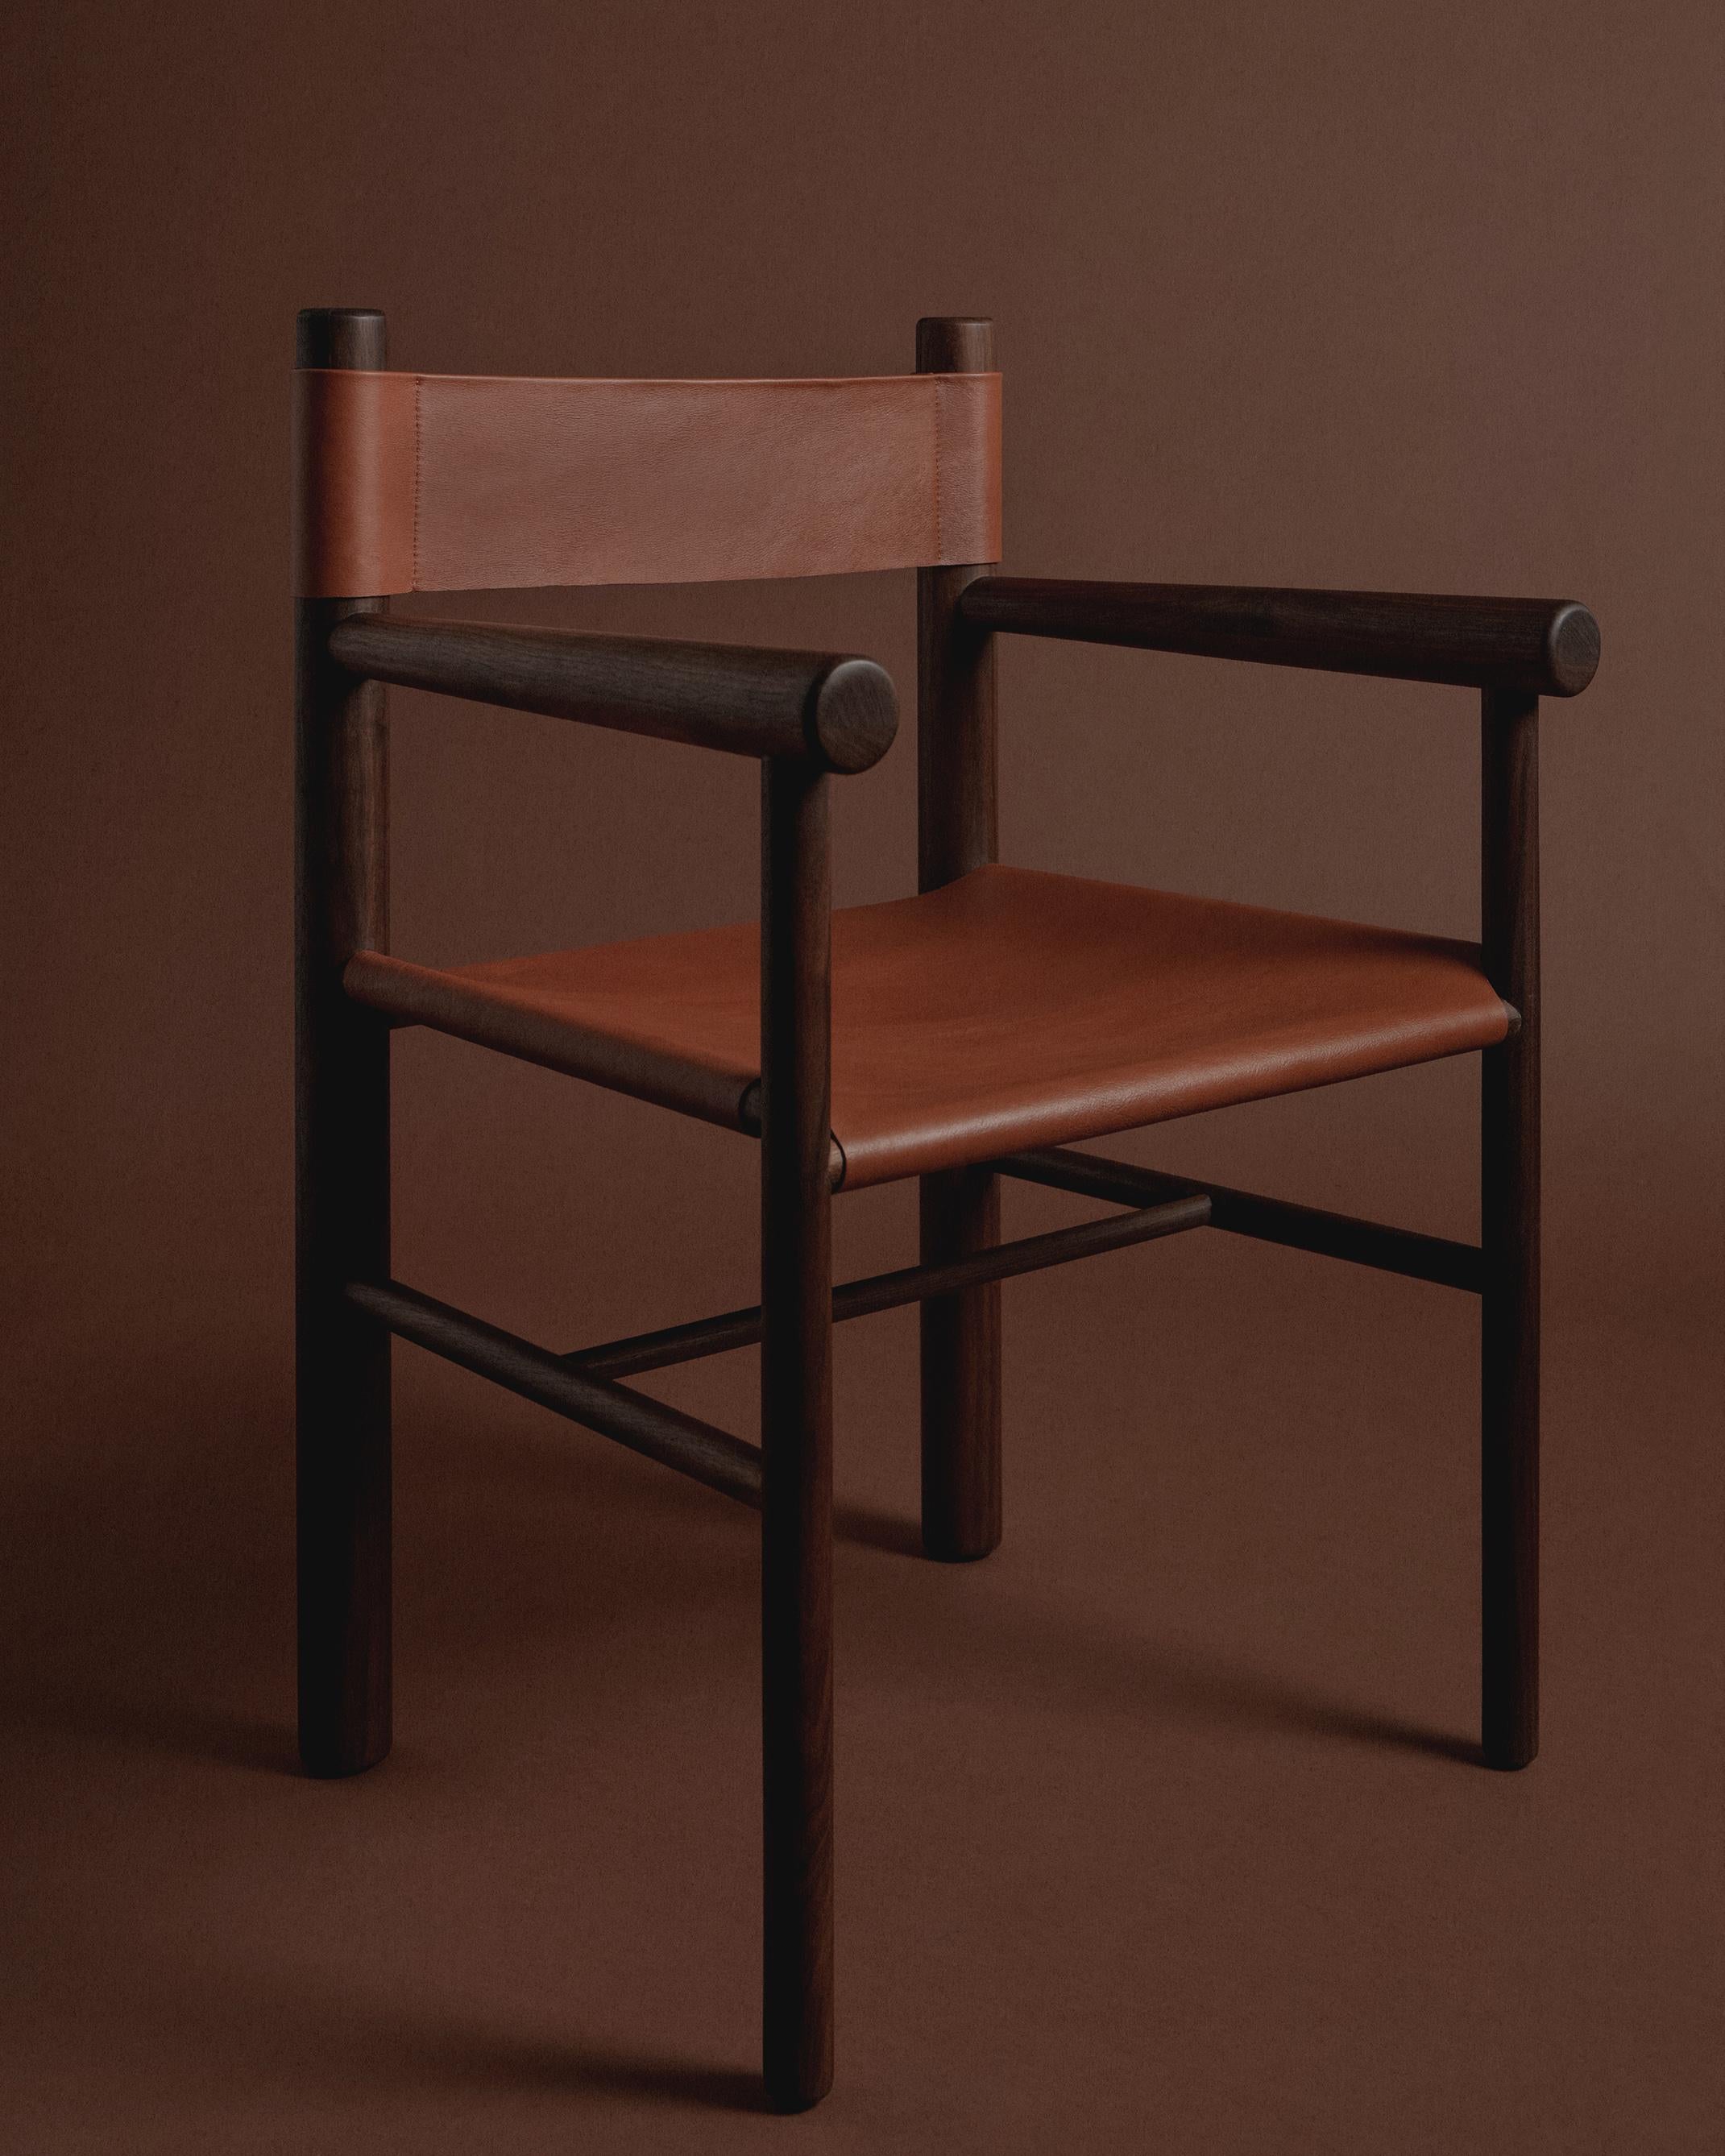 Inspired by utilitarian furniture, the Gradual Chair plays with the proportions of different size turned wood parts. The front and back legs are different diameters, and the arms taper forward, declining gradually to join the thicker back legs,